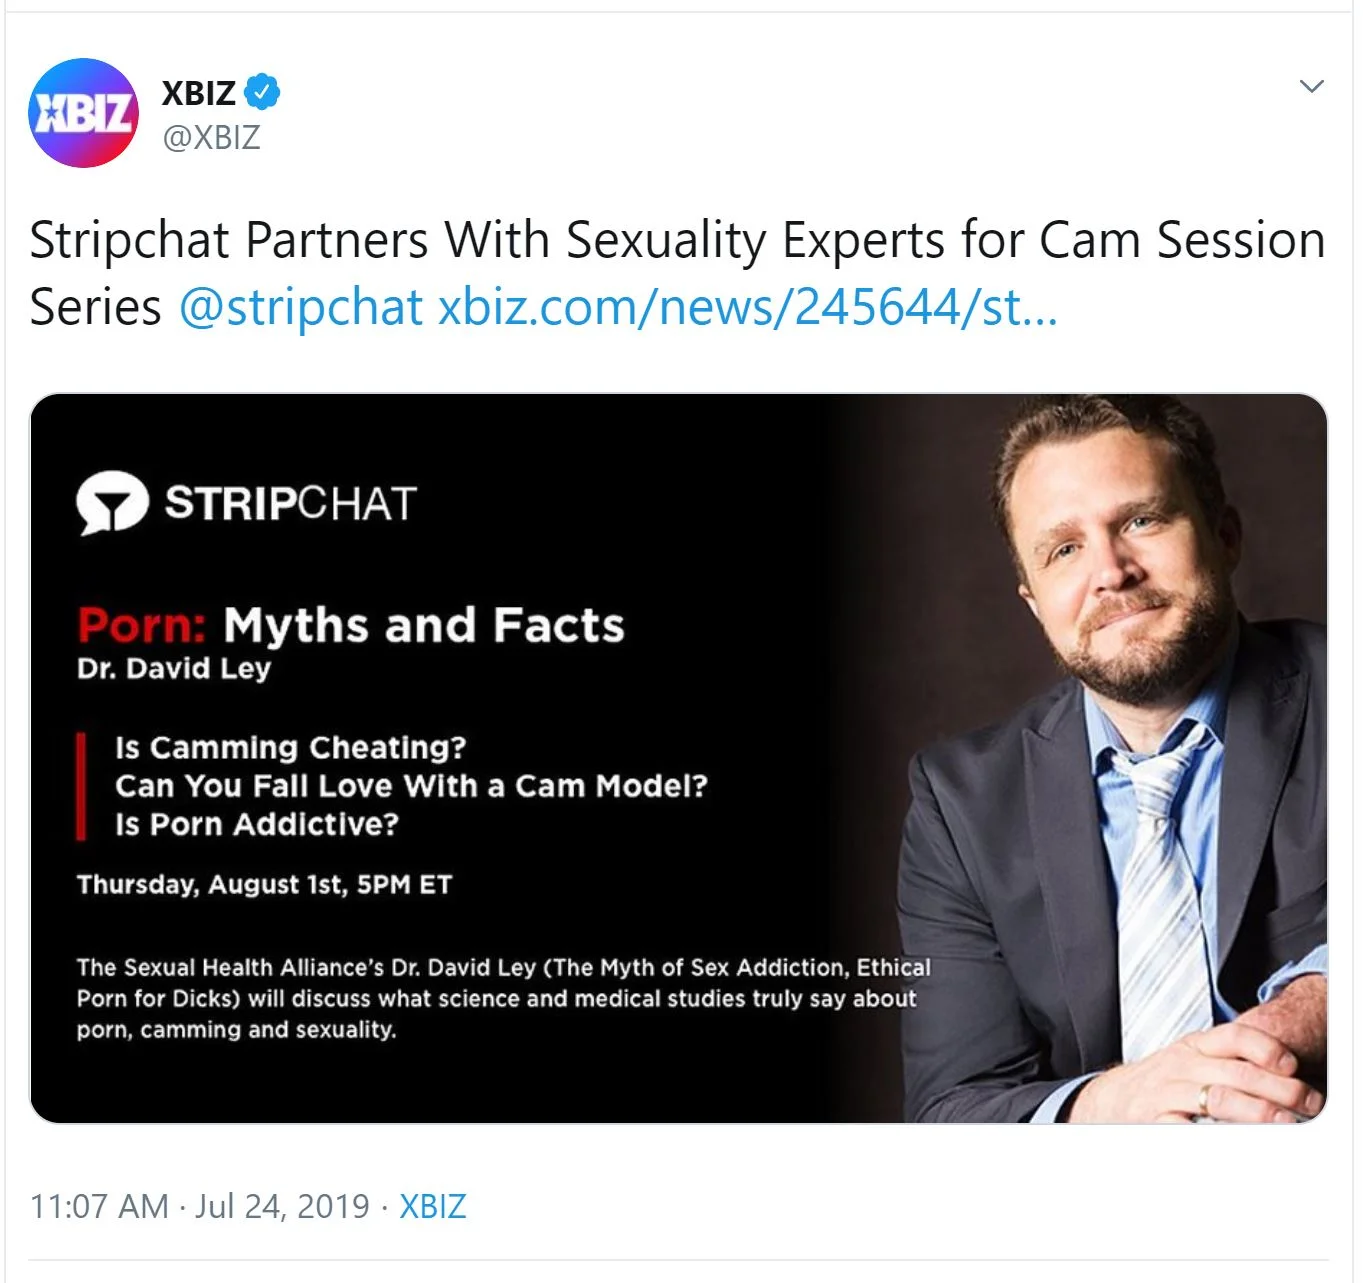 David Ley collaborates with porn industry giant xHamster to promote its websites and convince users that porn addiction and sex addiction are myths!